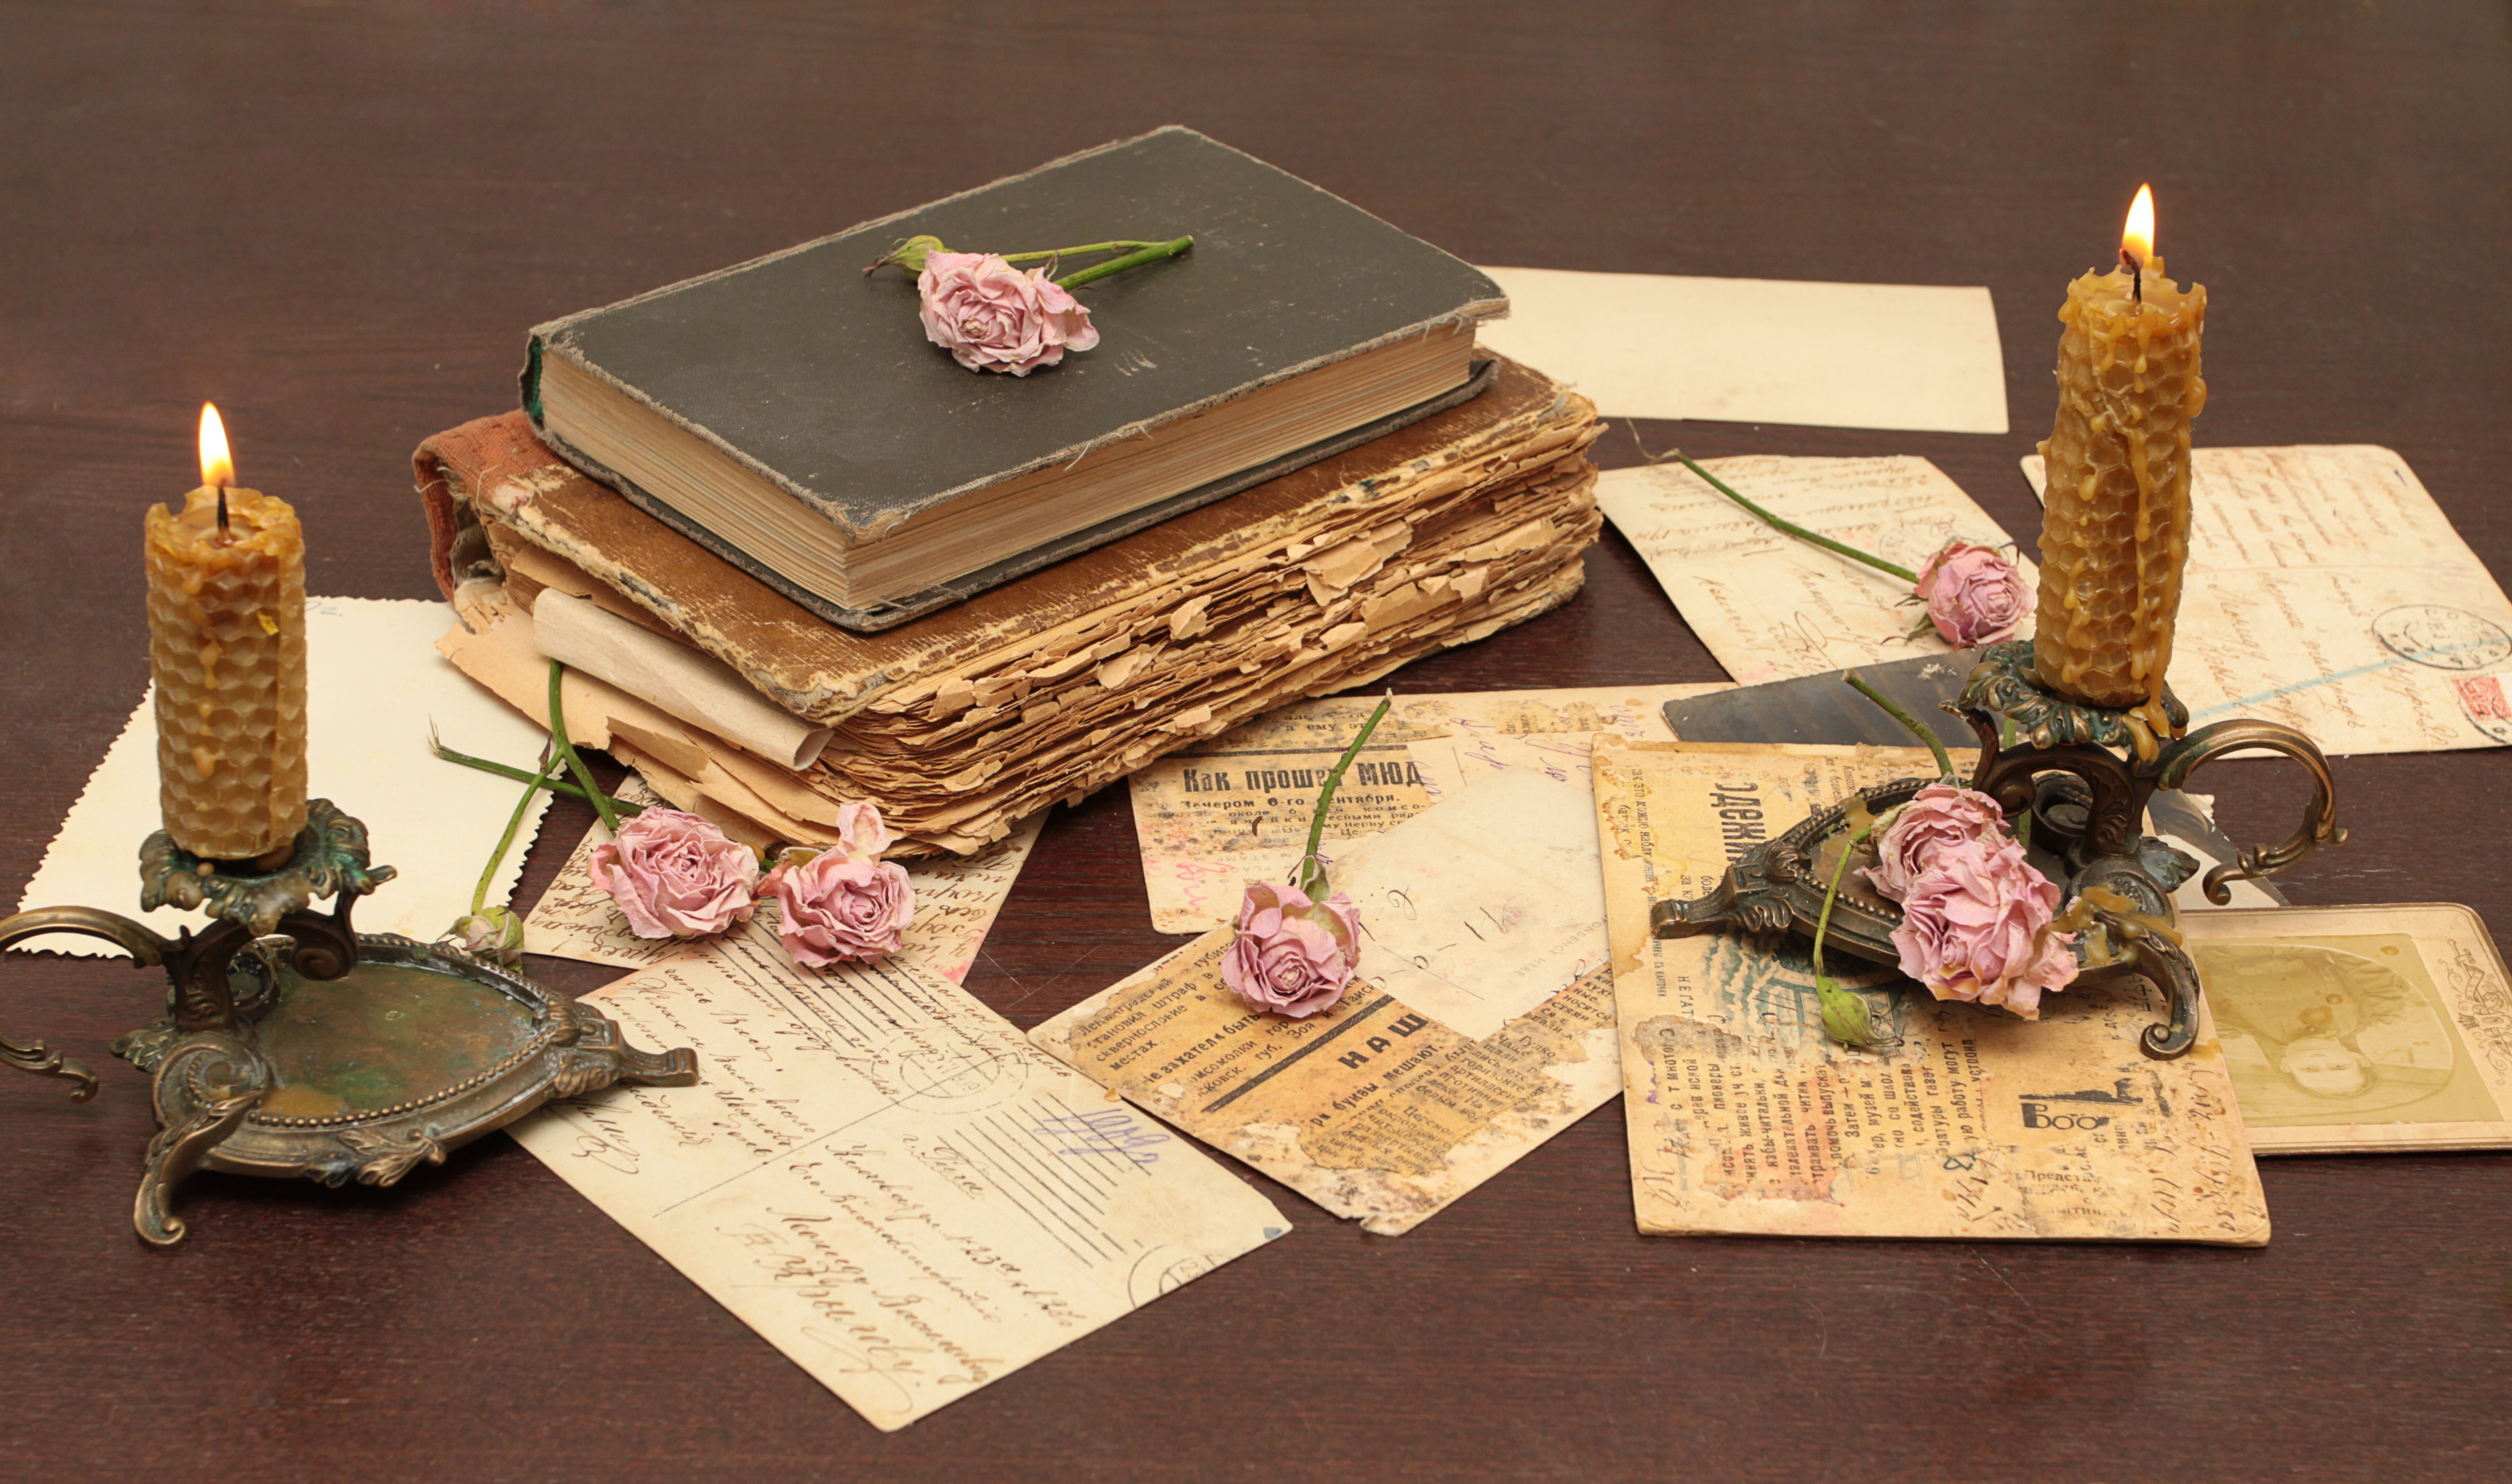 old, vintage, books, letters, candles, miscellaneous, miscellanea, flowers, roses, postcards, table, paper, candlesticks